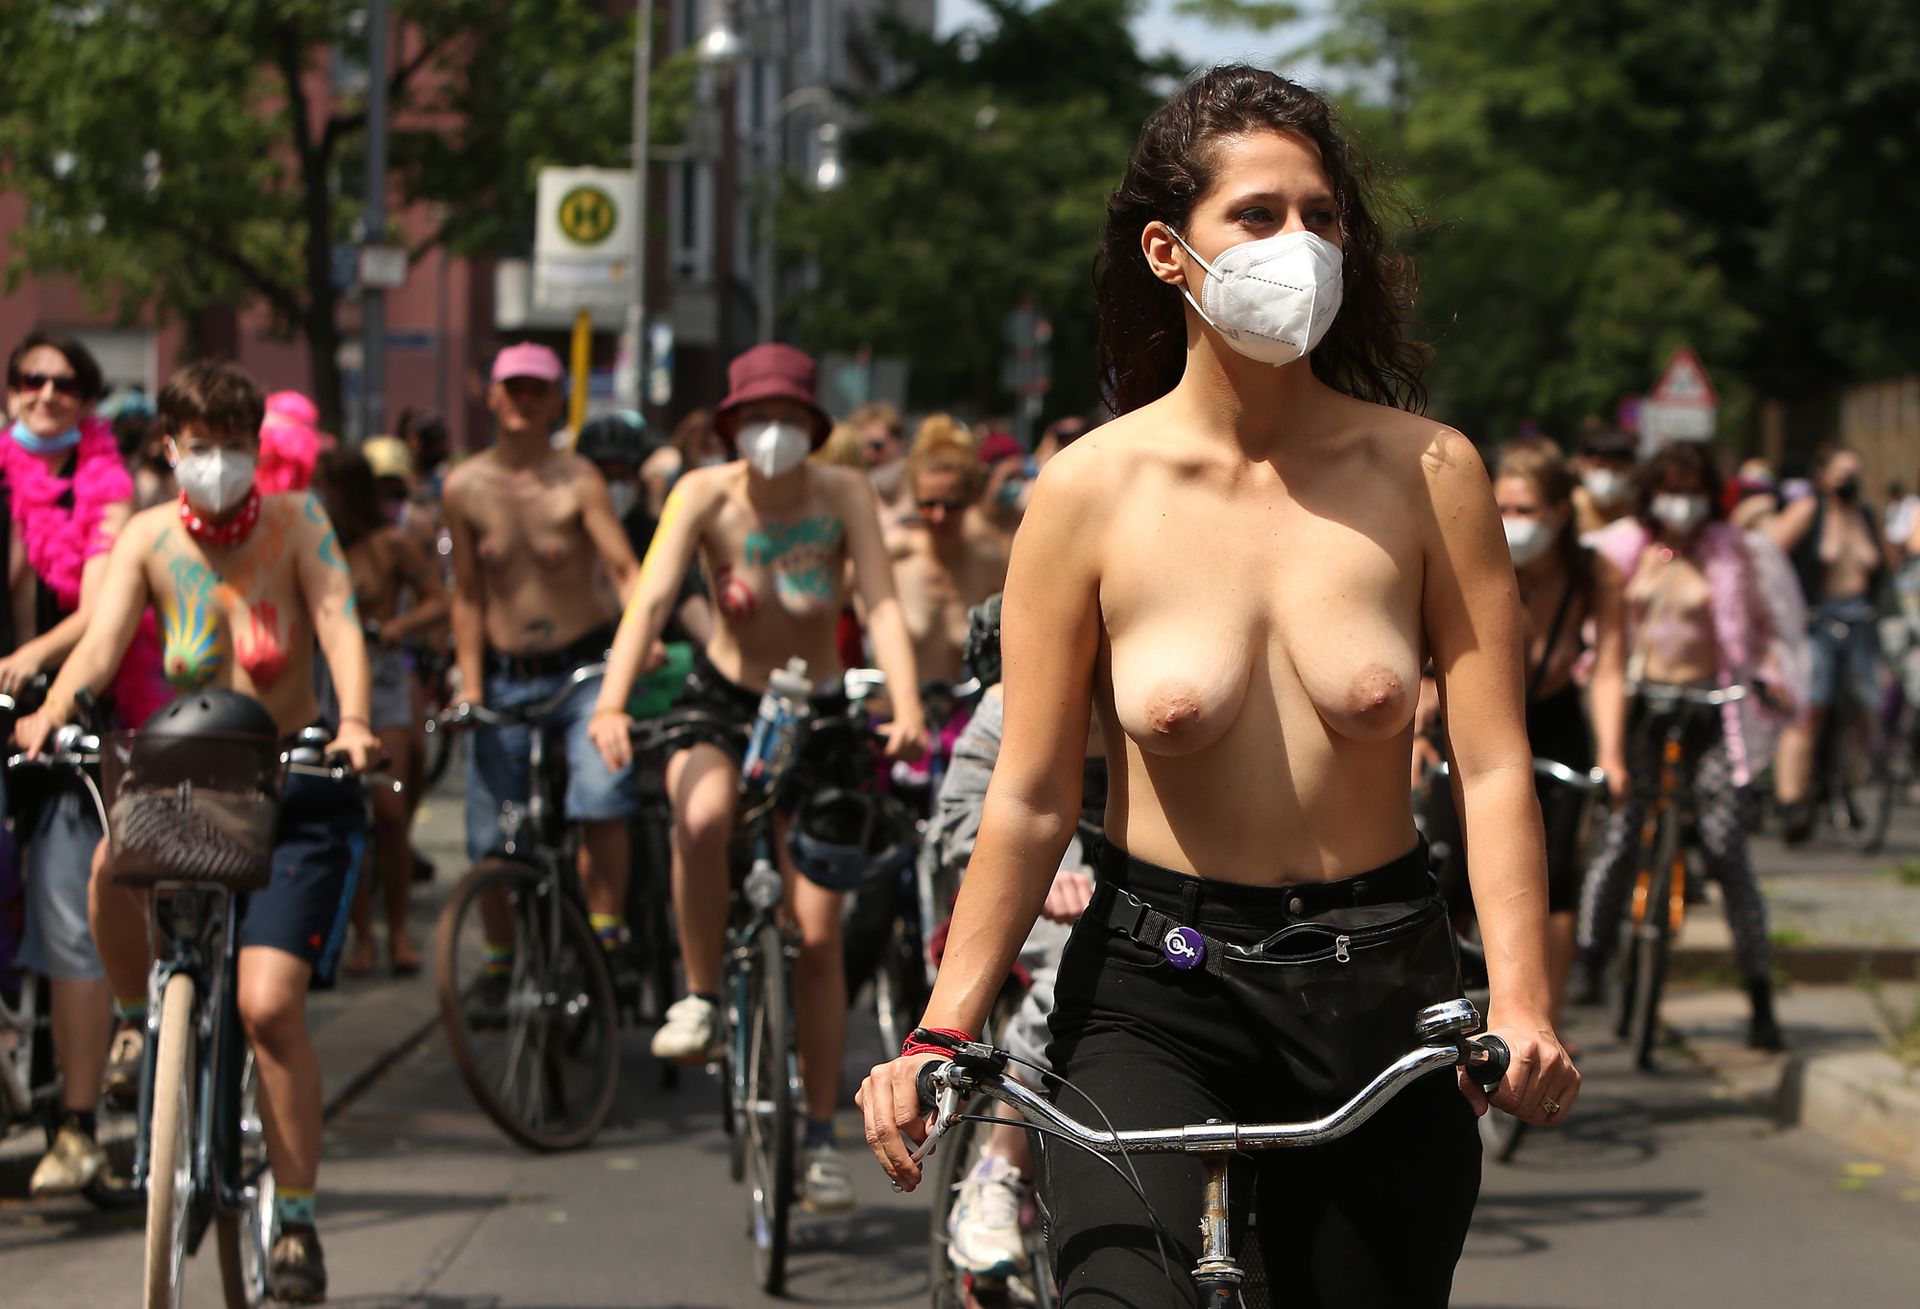 Topless-Protest-The-Fappening-Blog-25.jpg